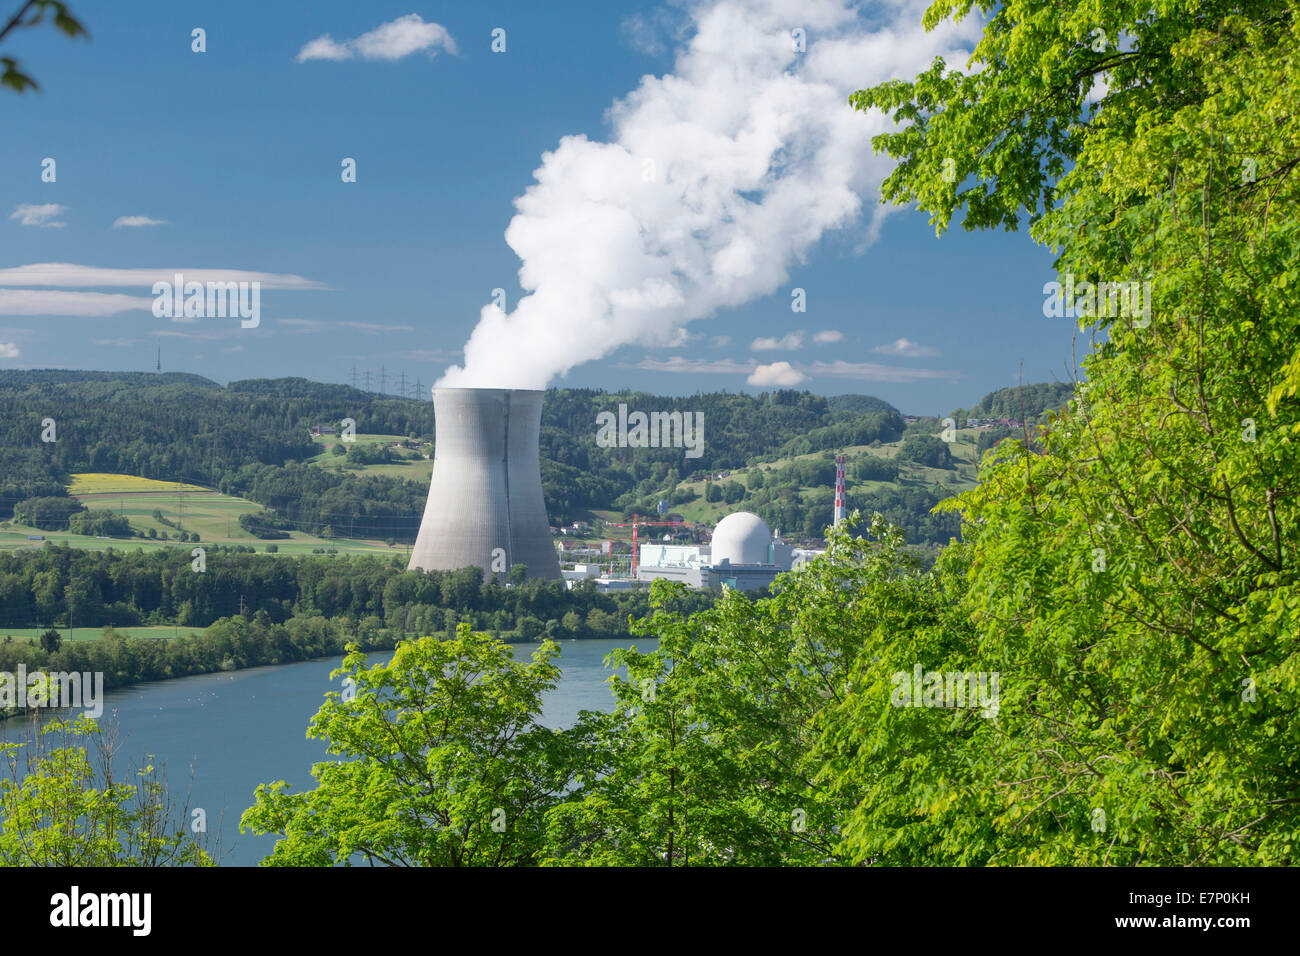 Nuclear power plant, nuclear power station, KKW, Leibstadt, energy, canton, AG, Aargau, Switzerland, Europe, Stock Photo